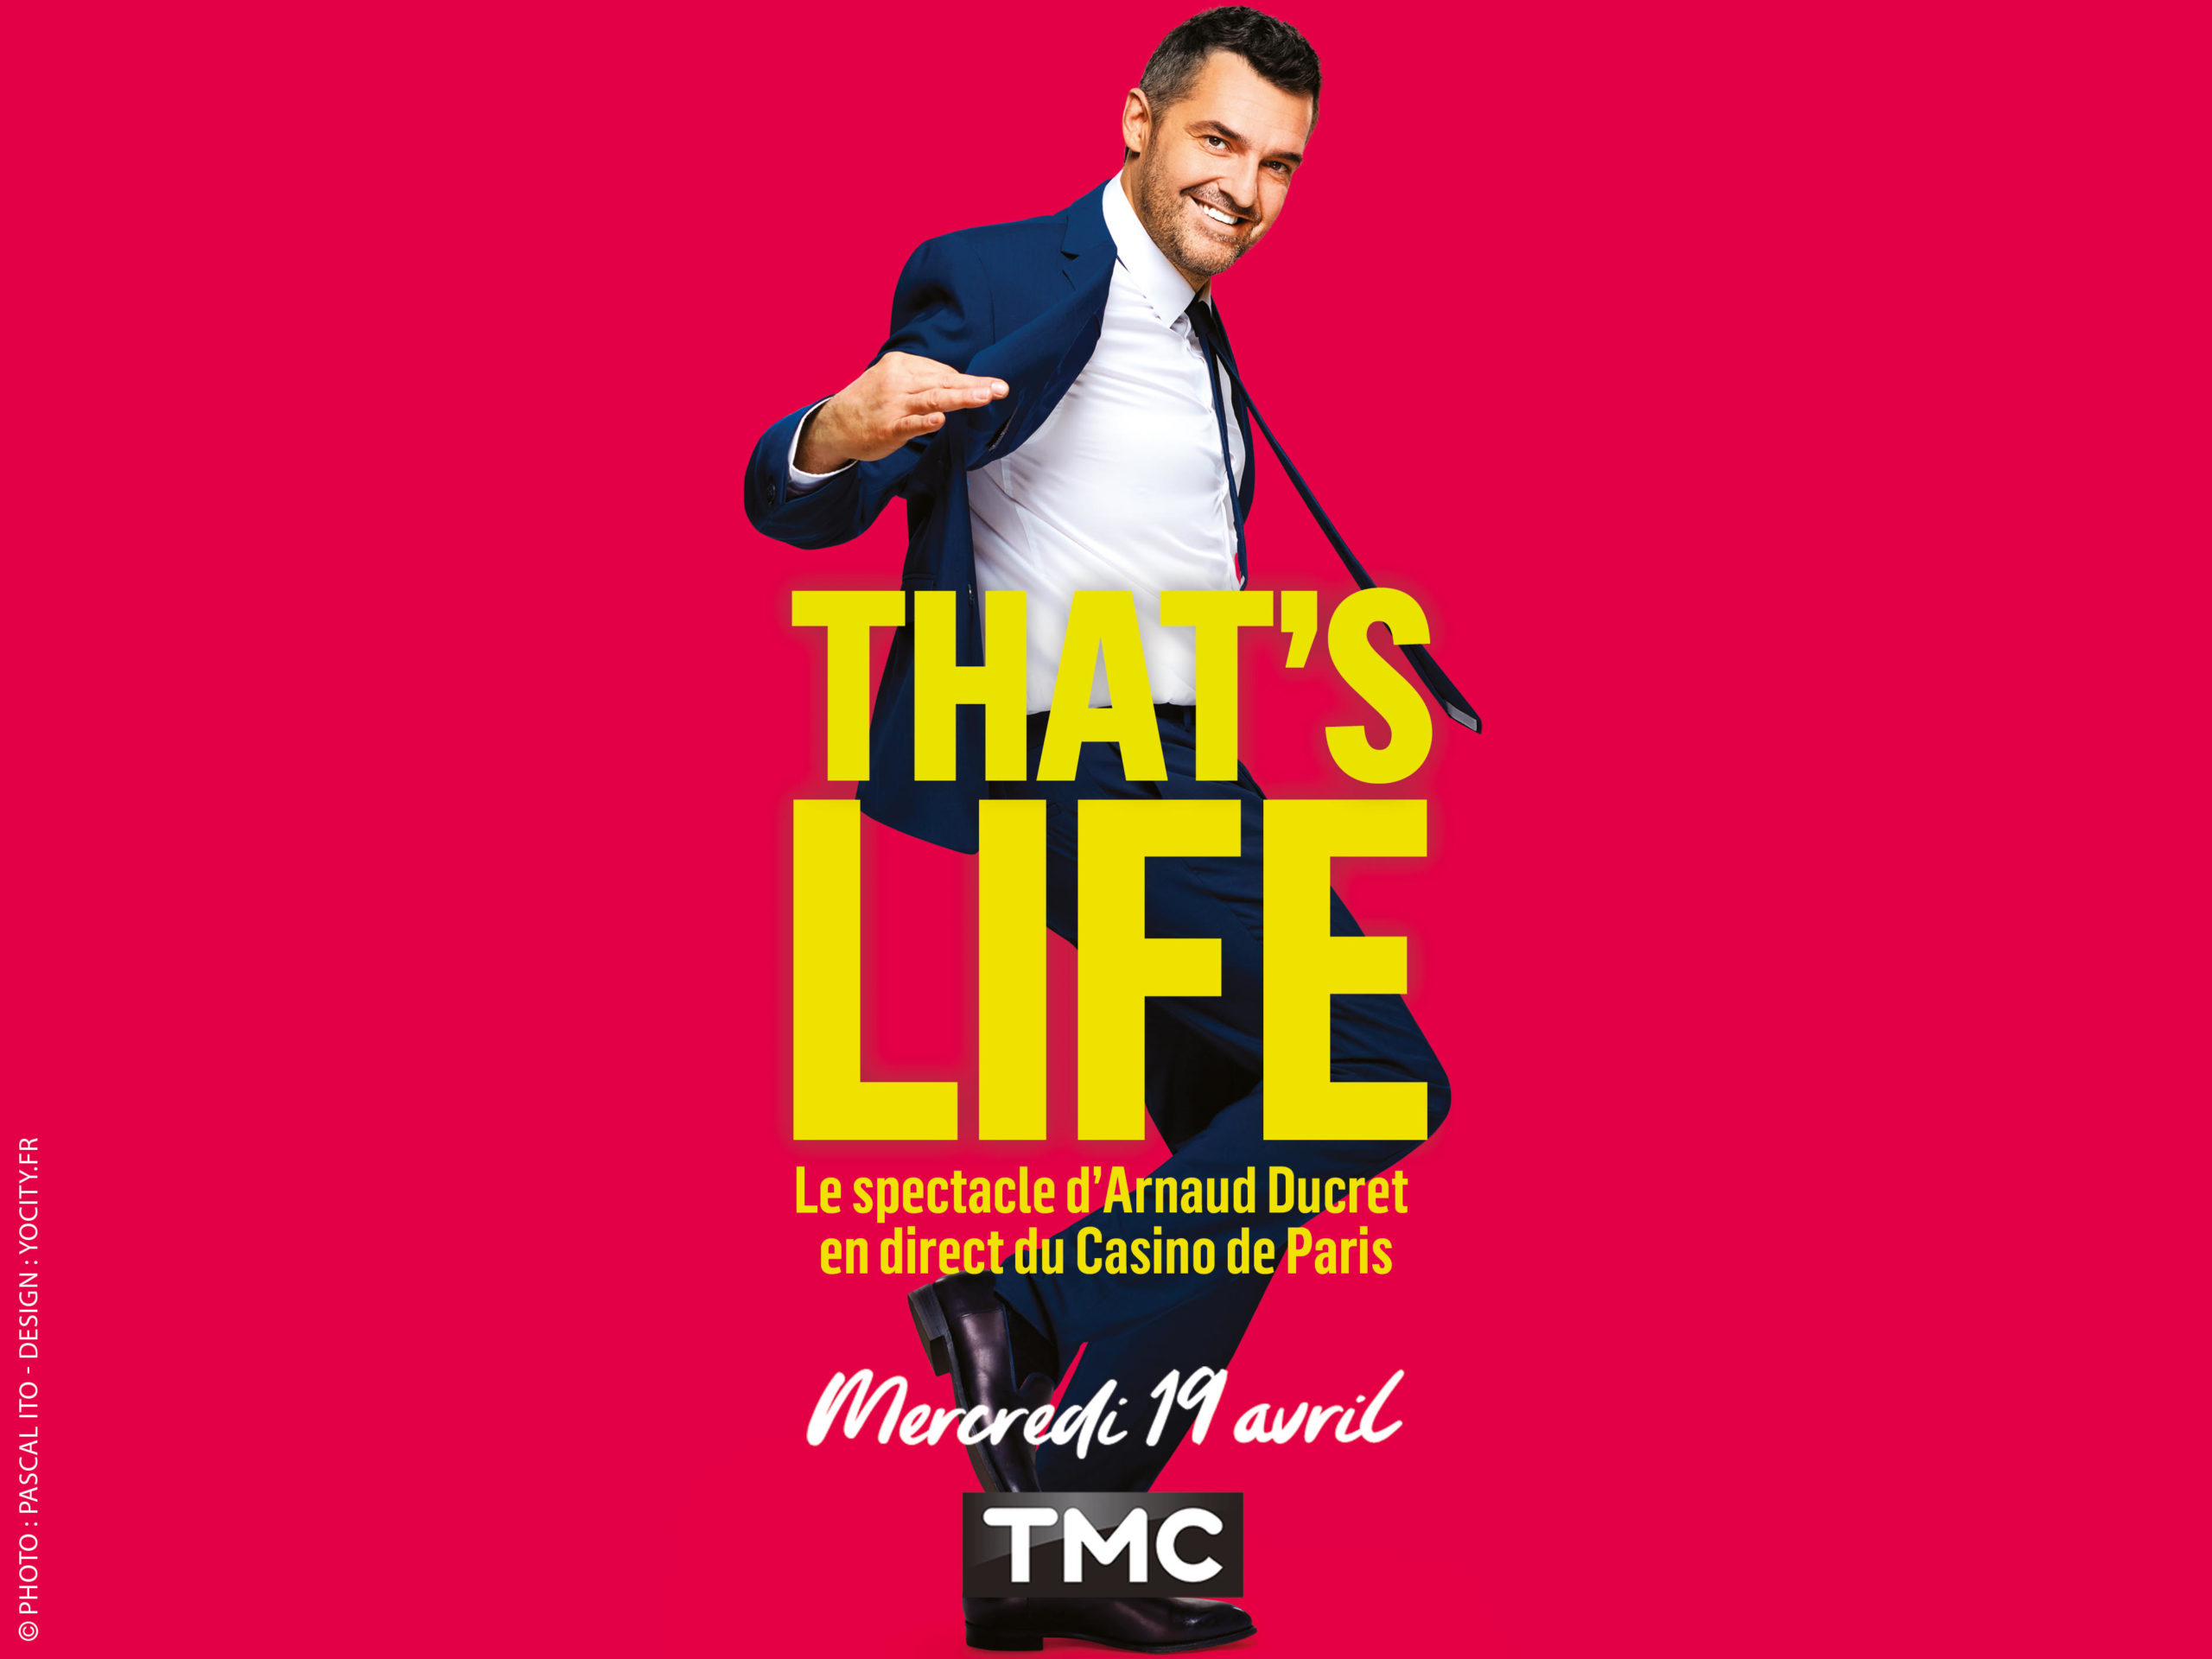 Arnaud Ducret : son spectacle "That's life"